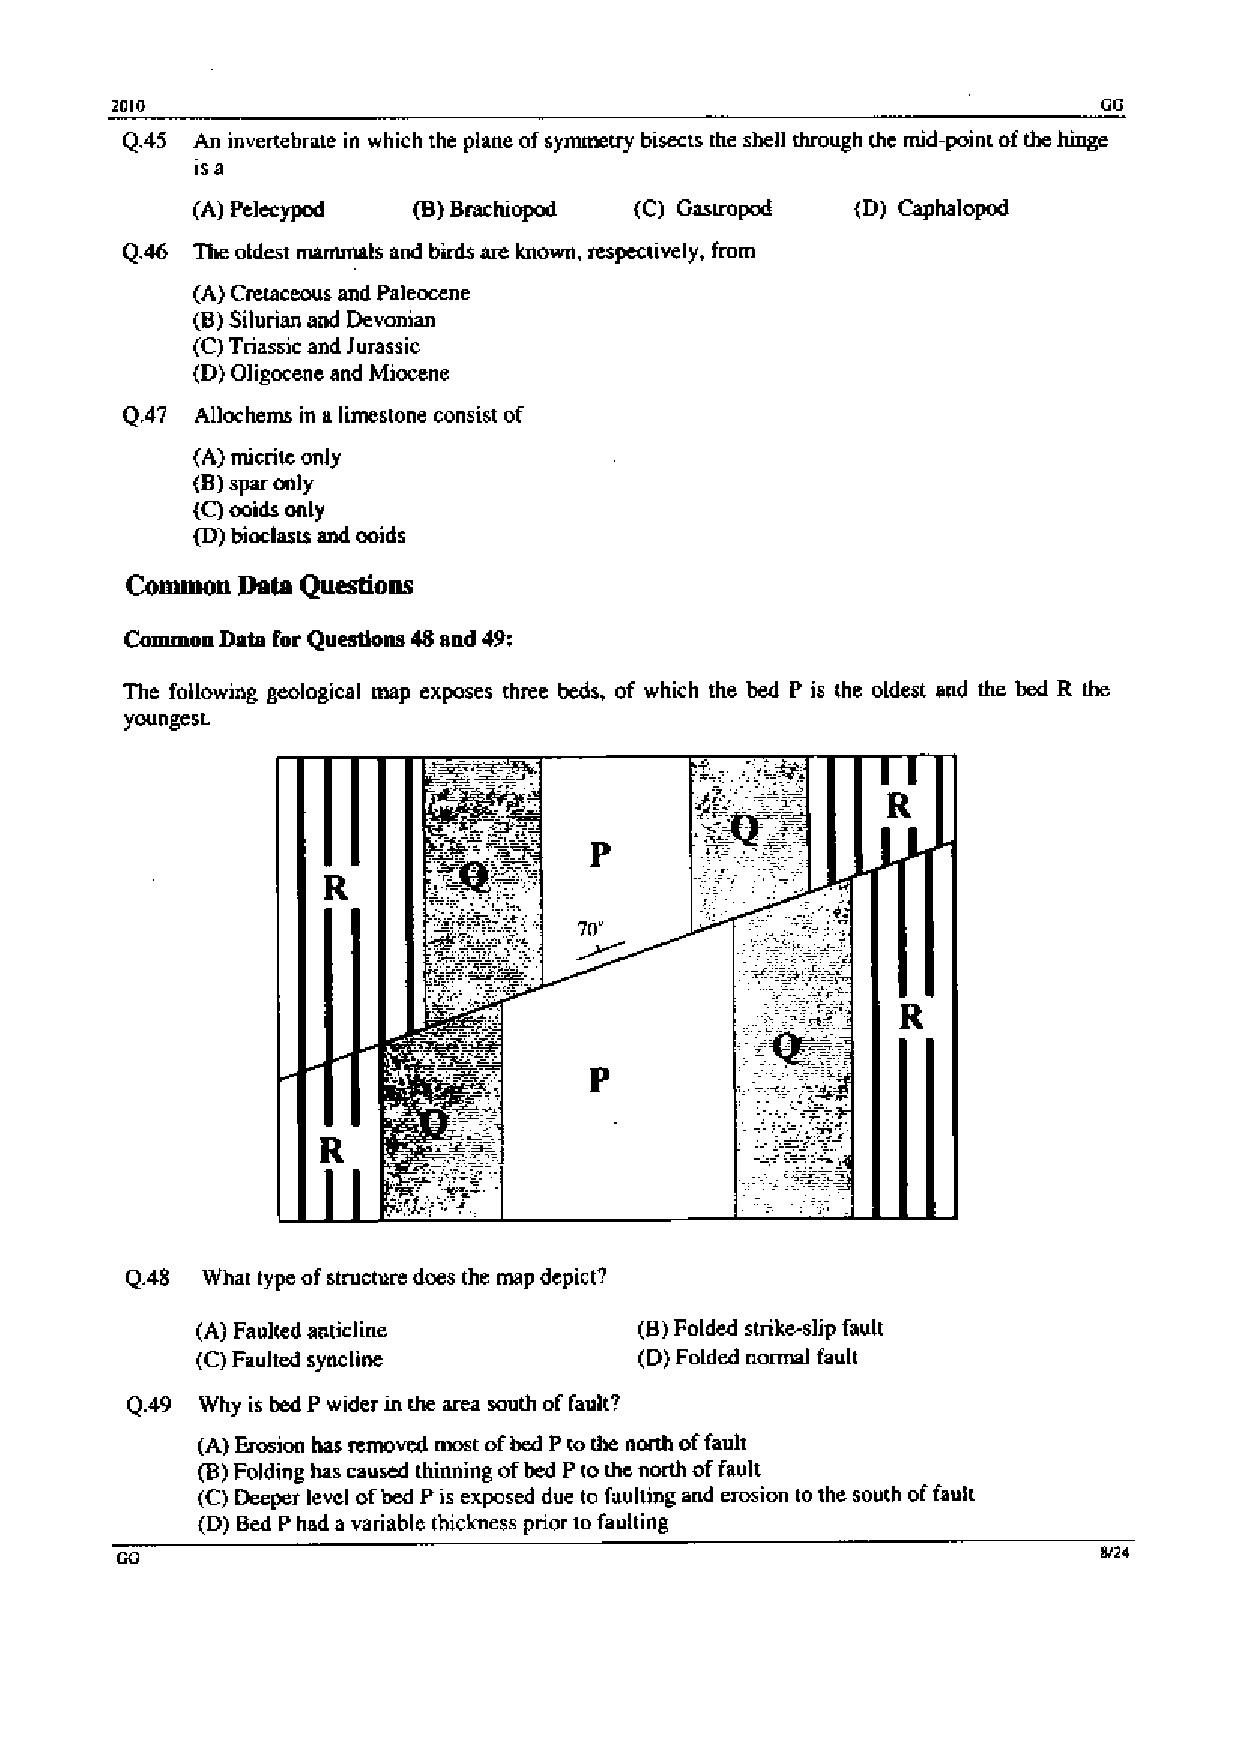 GATE Exam Question Paper 2010 Geology and Geophysics 8